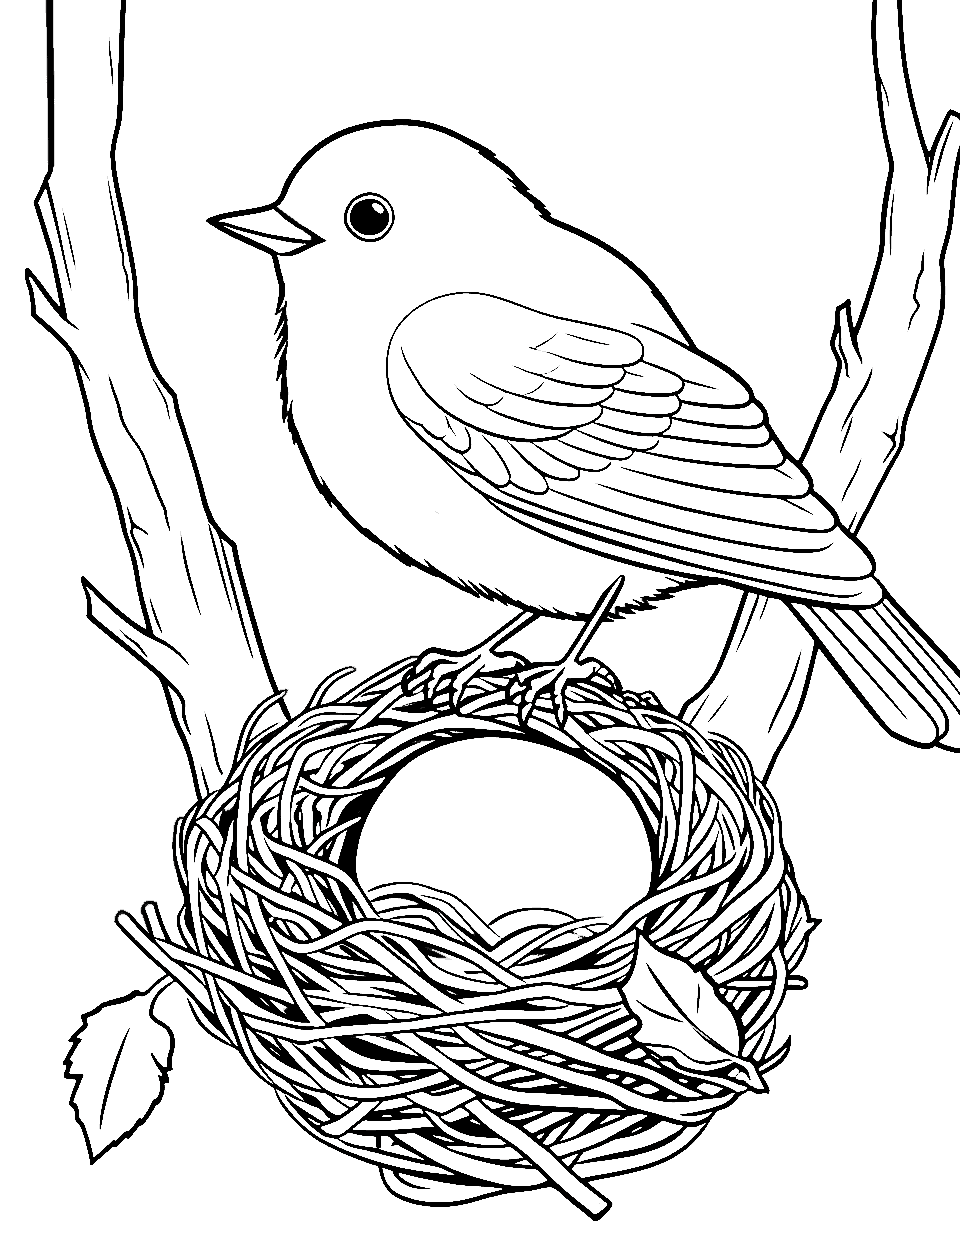 Nightingale’s Nest Coloring Page - A nightingale sitting beside its nest.